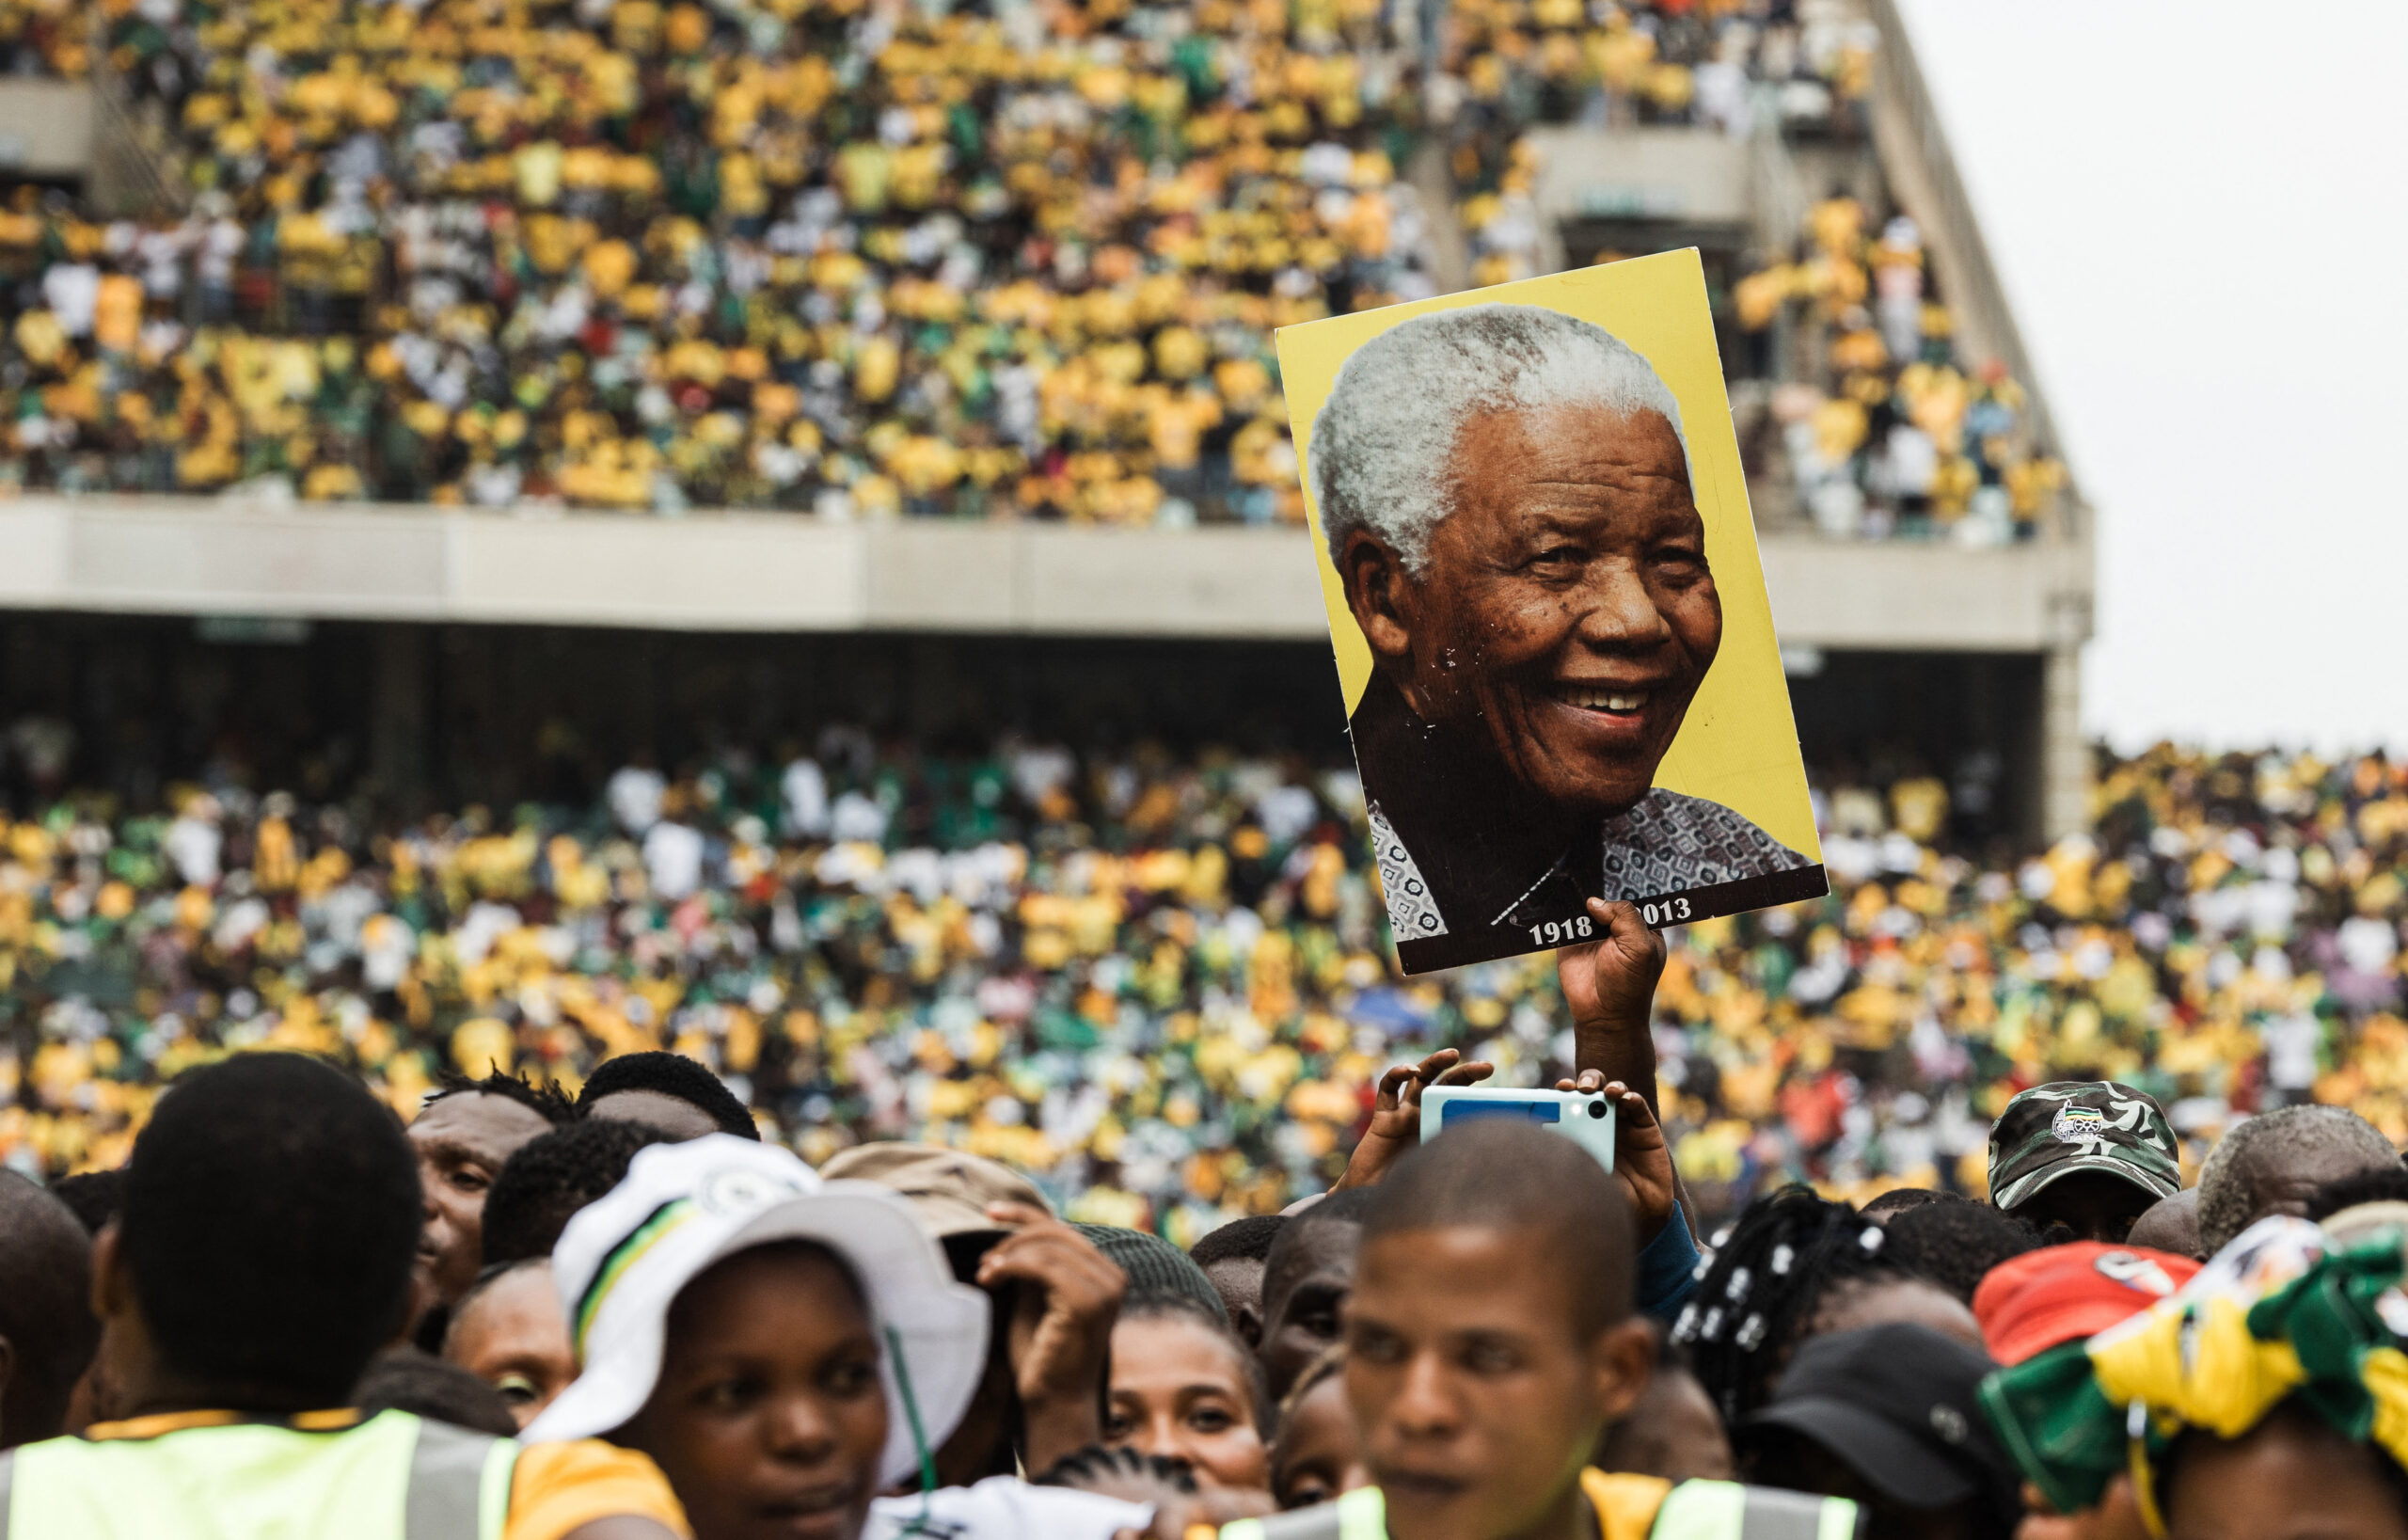 South Africa gears up for close May vote